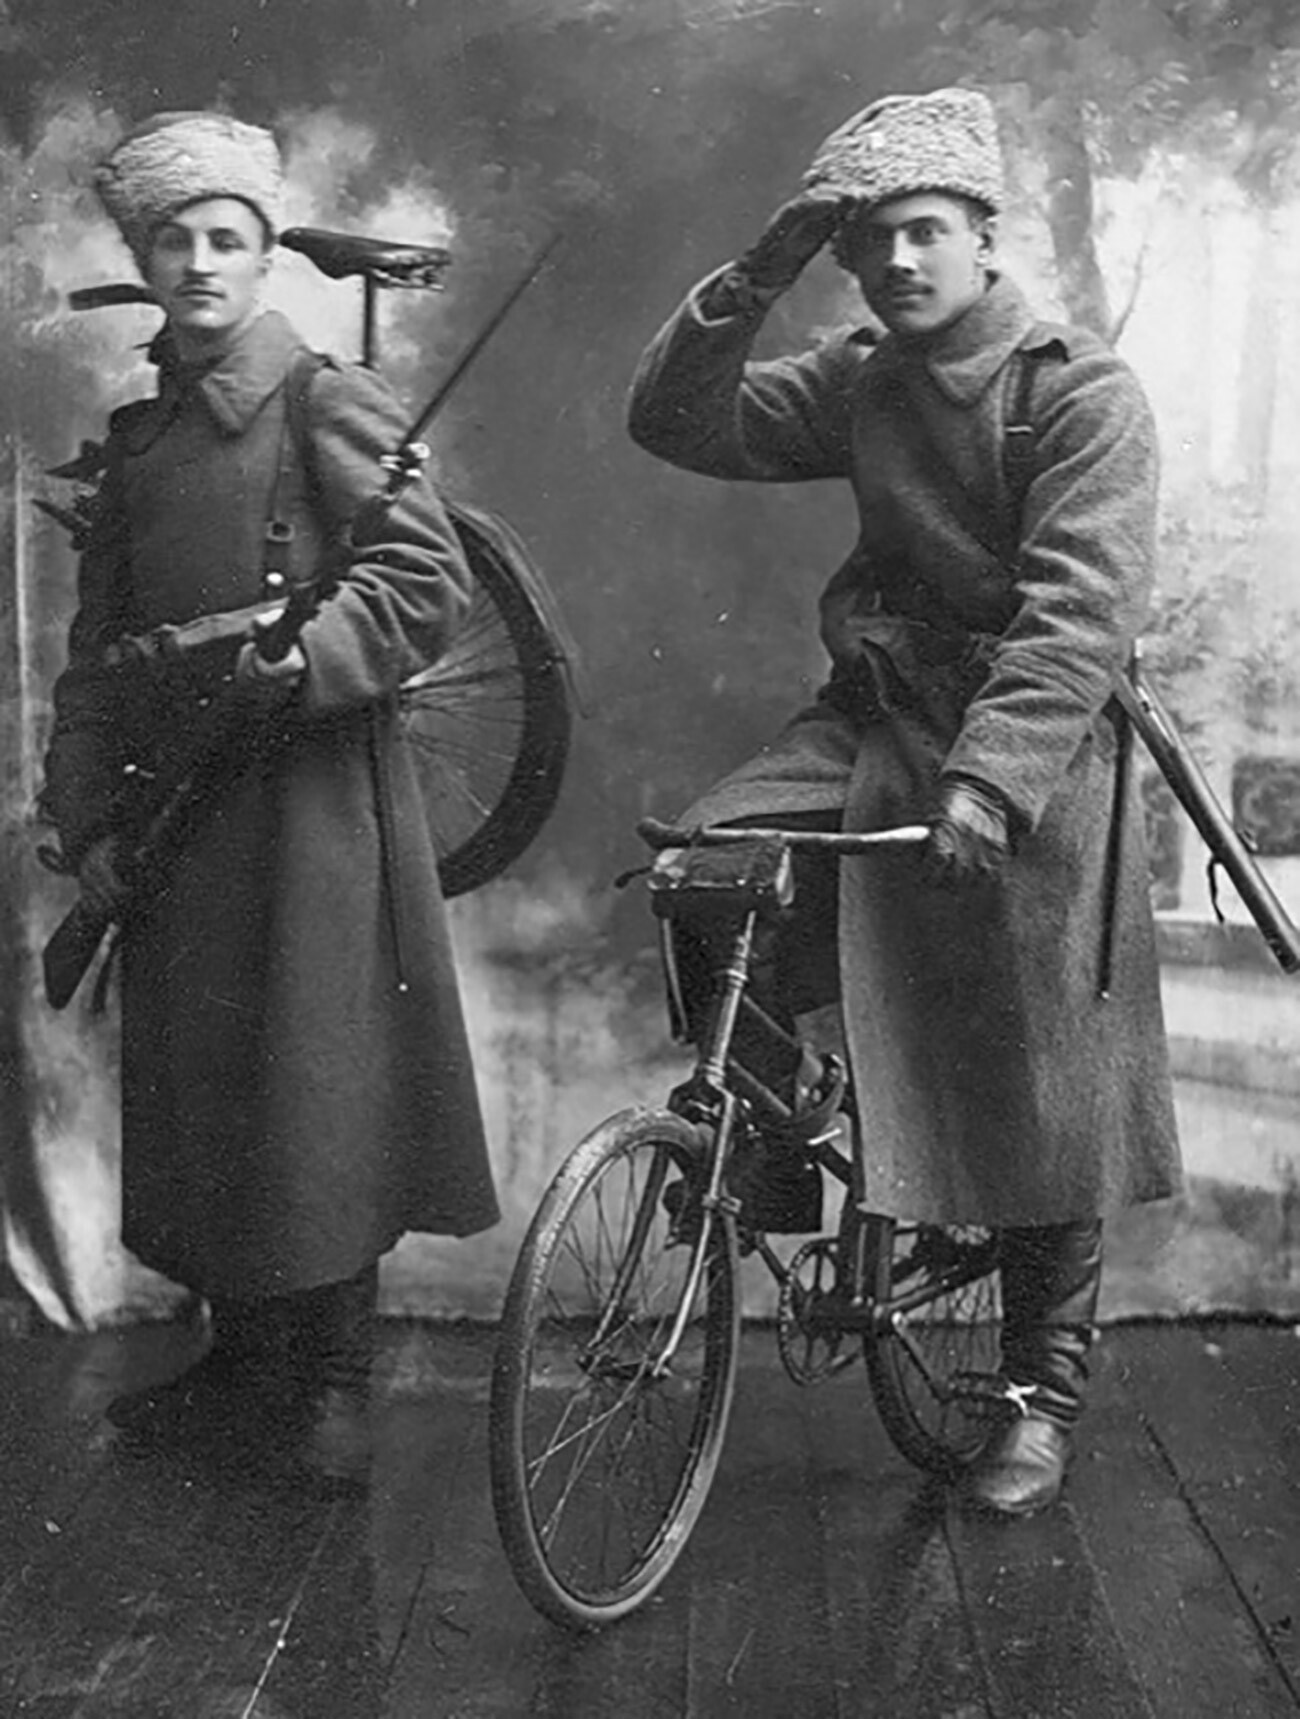 Bicyclists of the Imperial Russian Army, circa 1916.